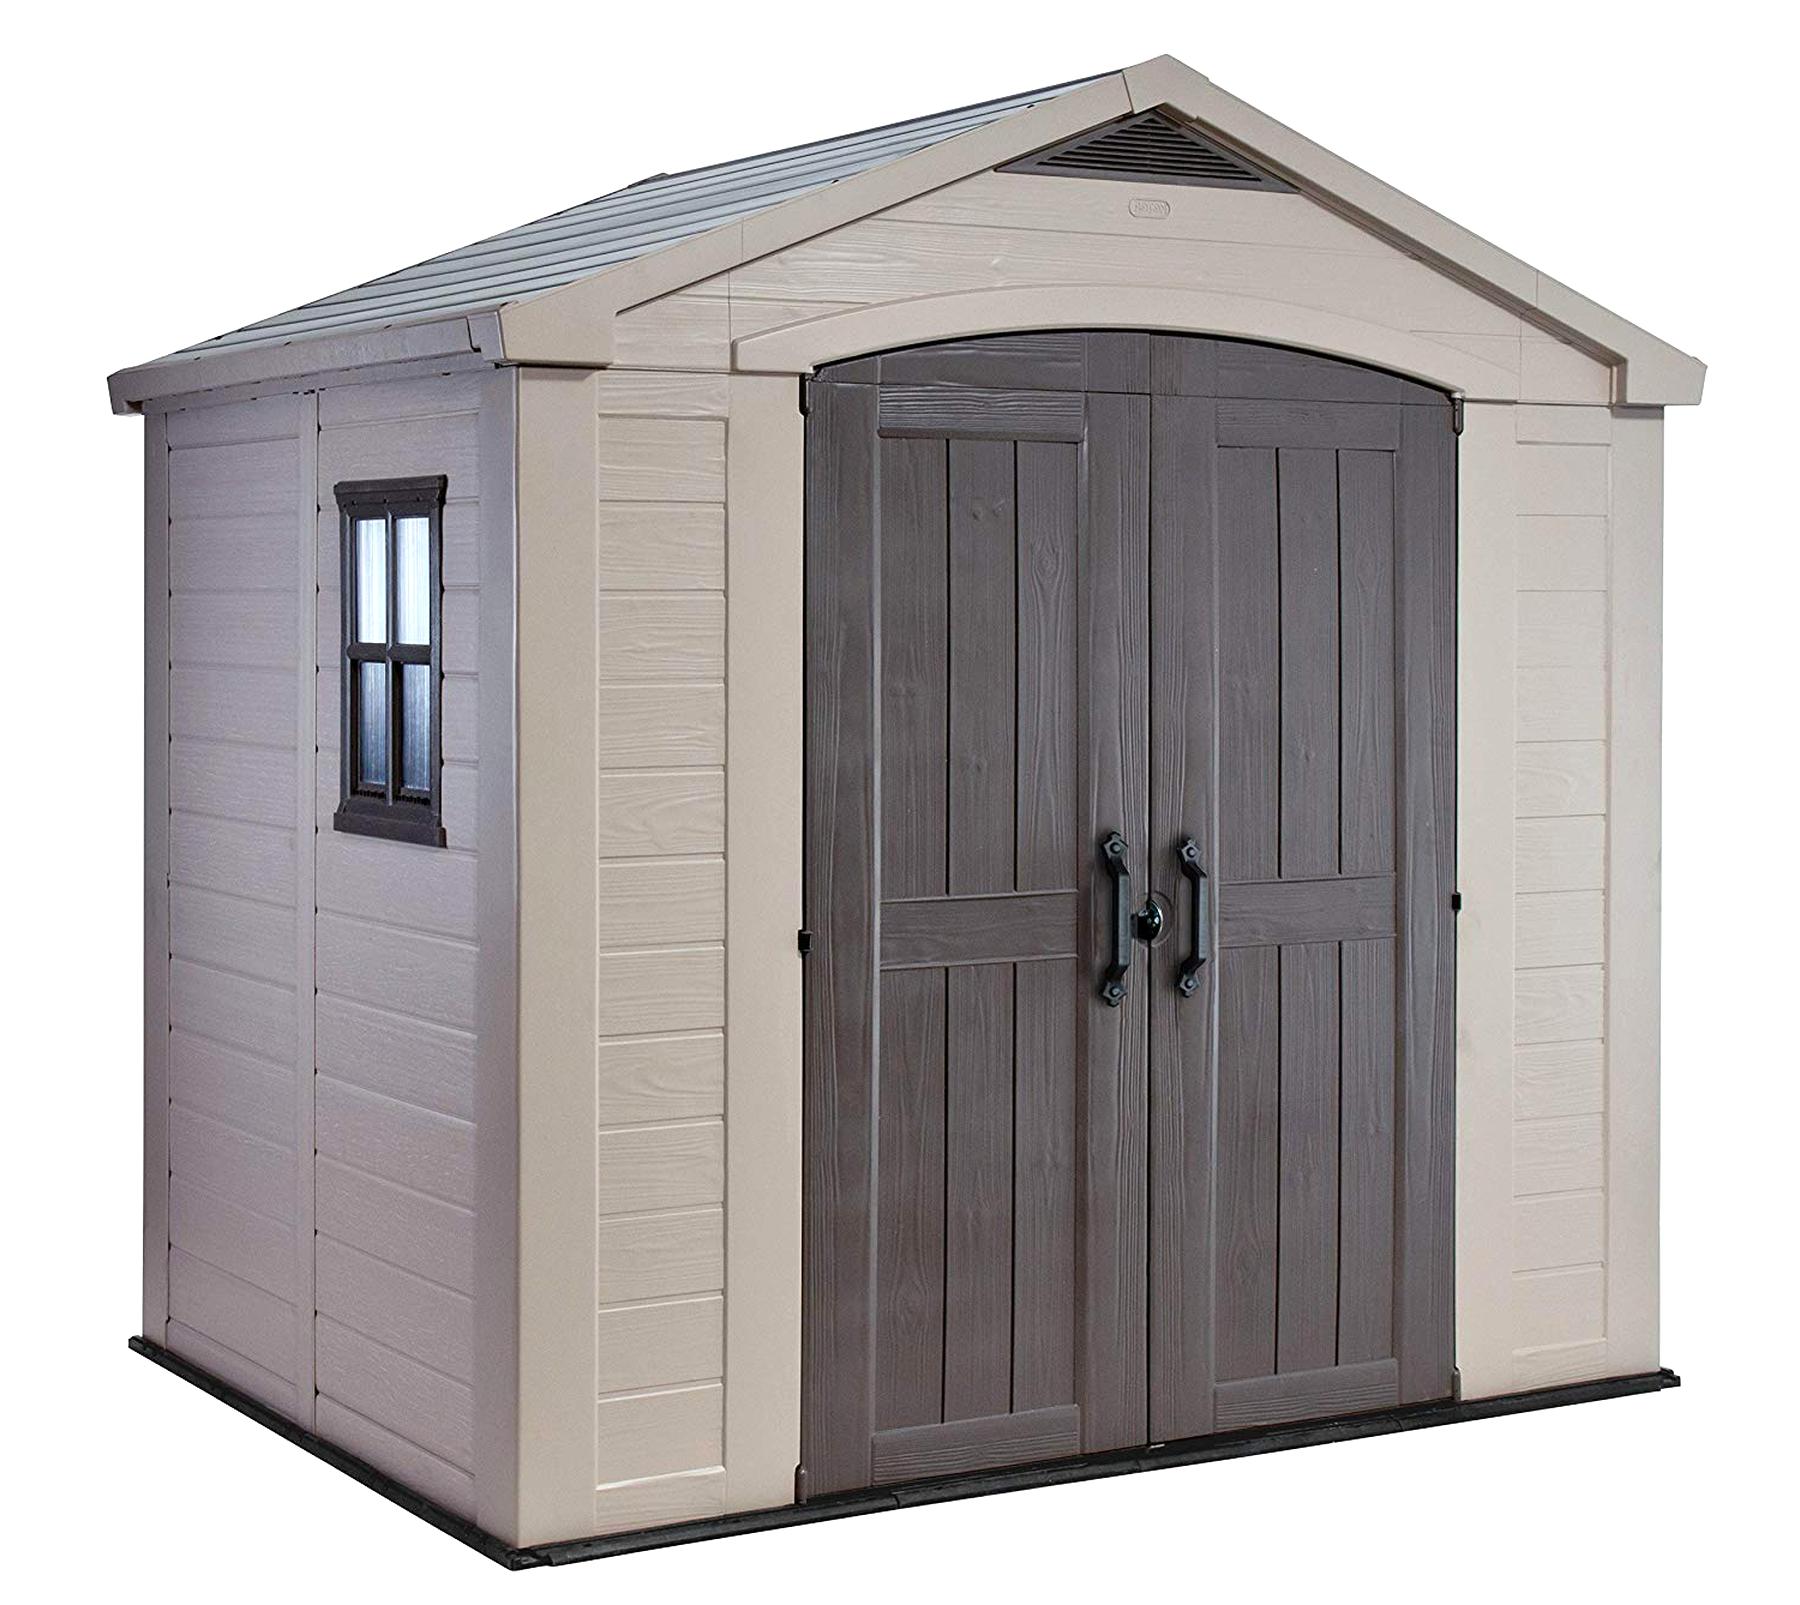 Plastic Garden Sheds for sale in UK View 47 bargains